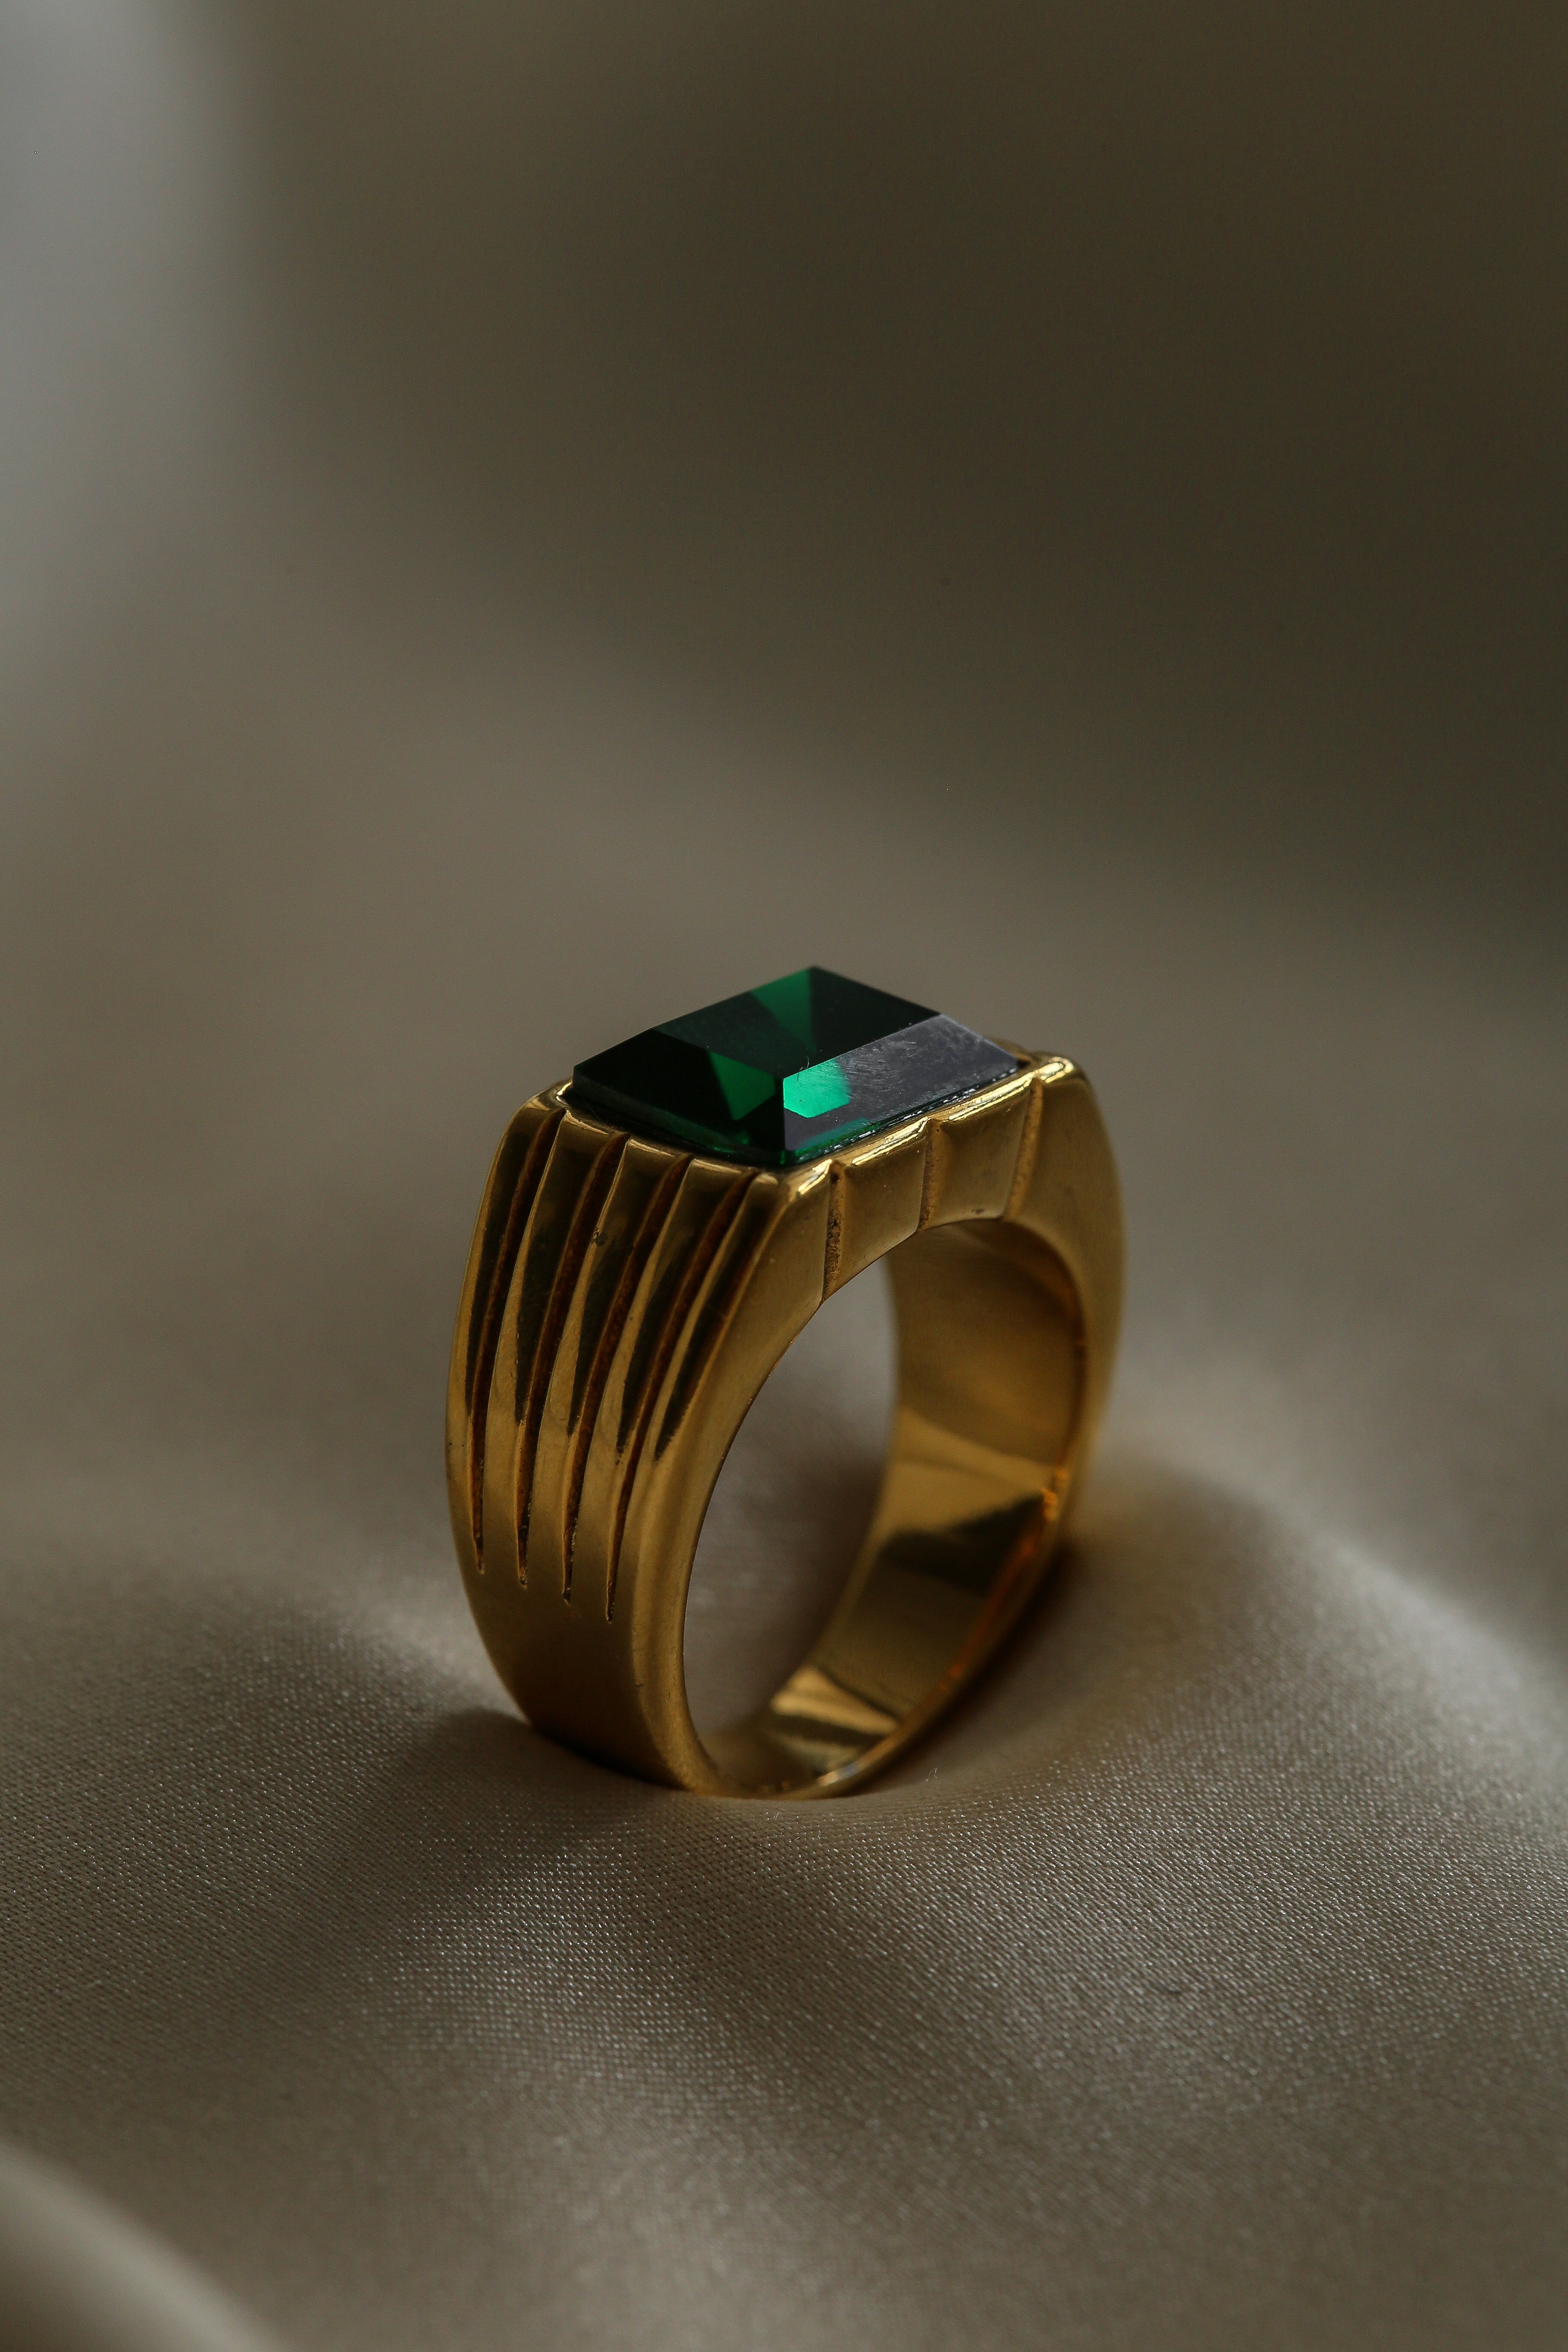 Ida Ring - Boutique Minimaliste has waterproof, durable, elegant and vintage inspired jewelry